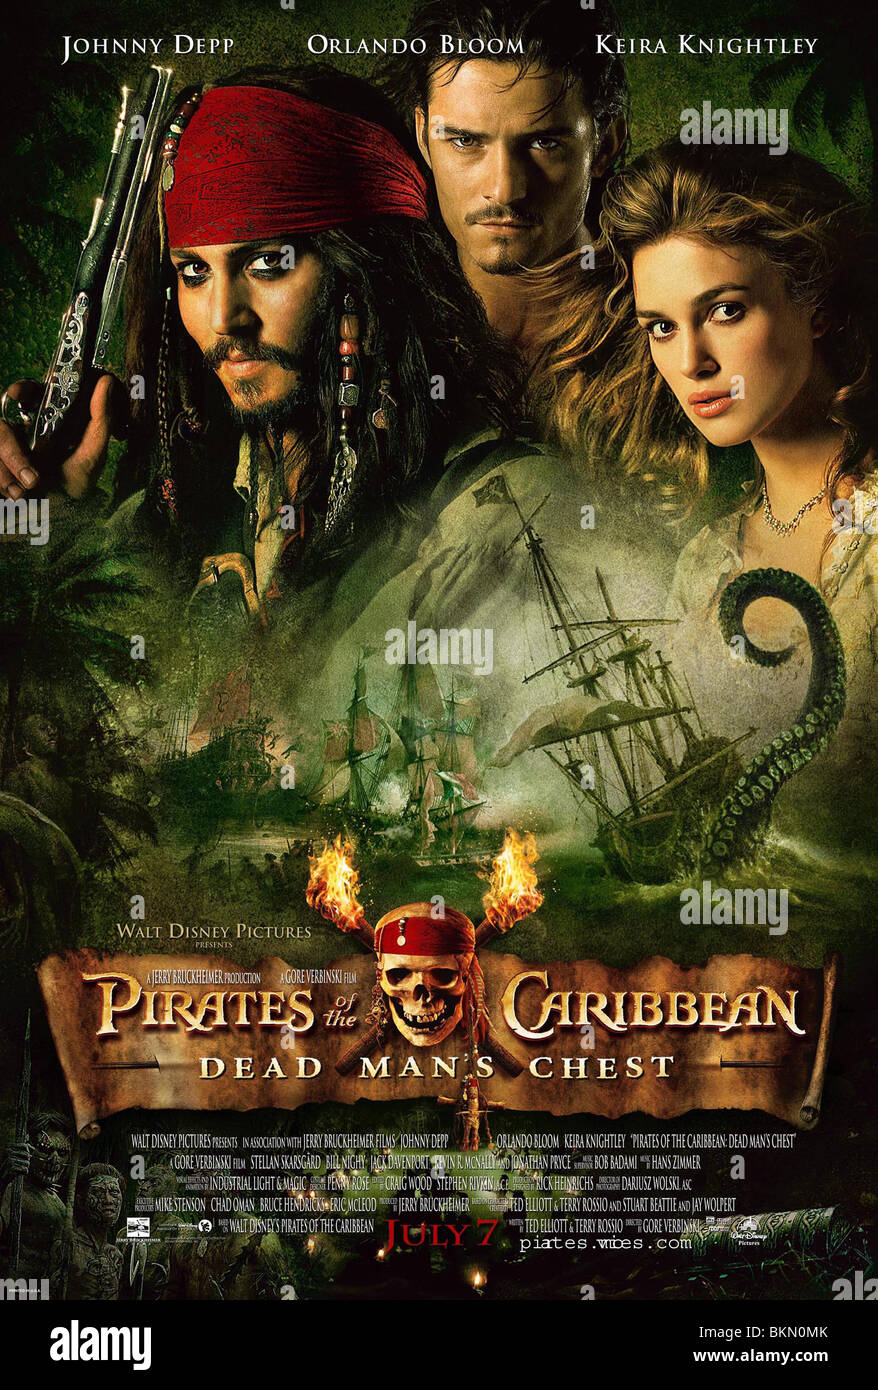 PIRATES OF THE CARIBBEAN: DEAD MAN'S CHEST (2006) POSTER PDMC 001-POST Stock Photo